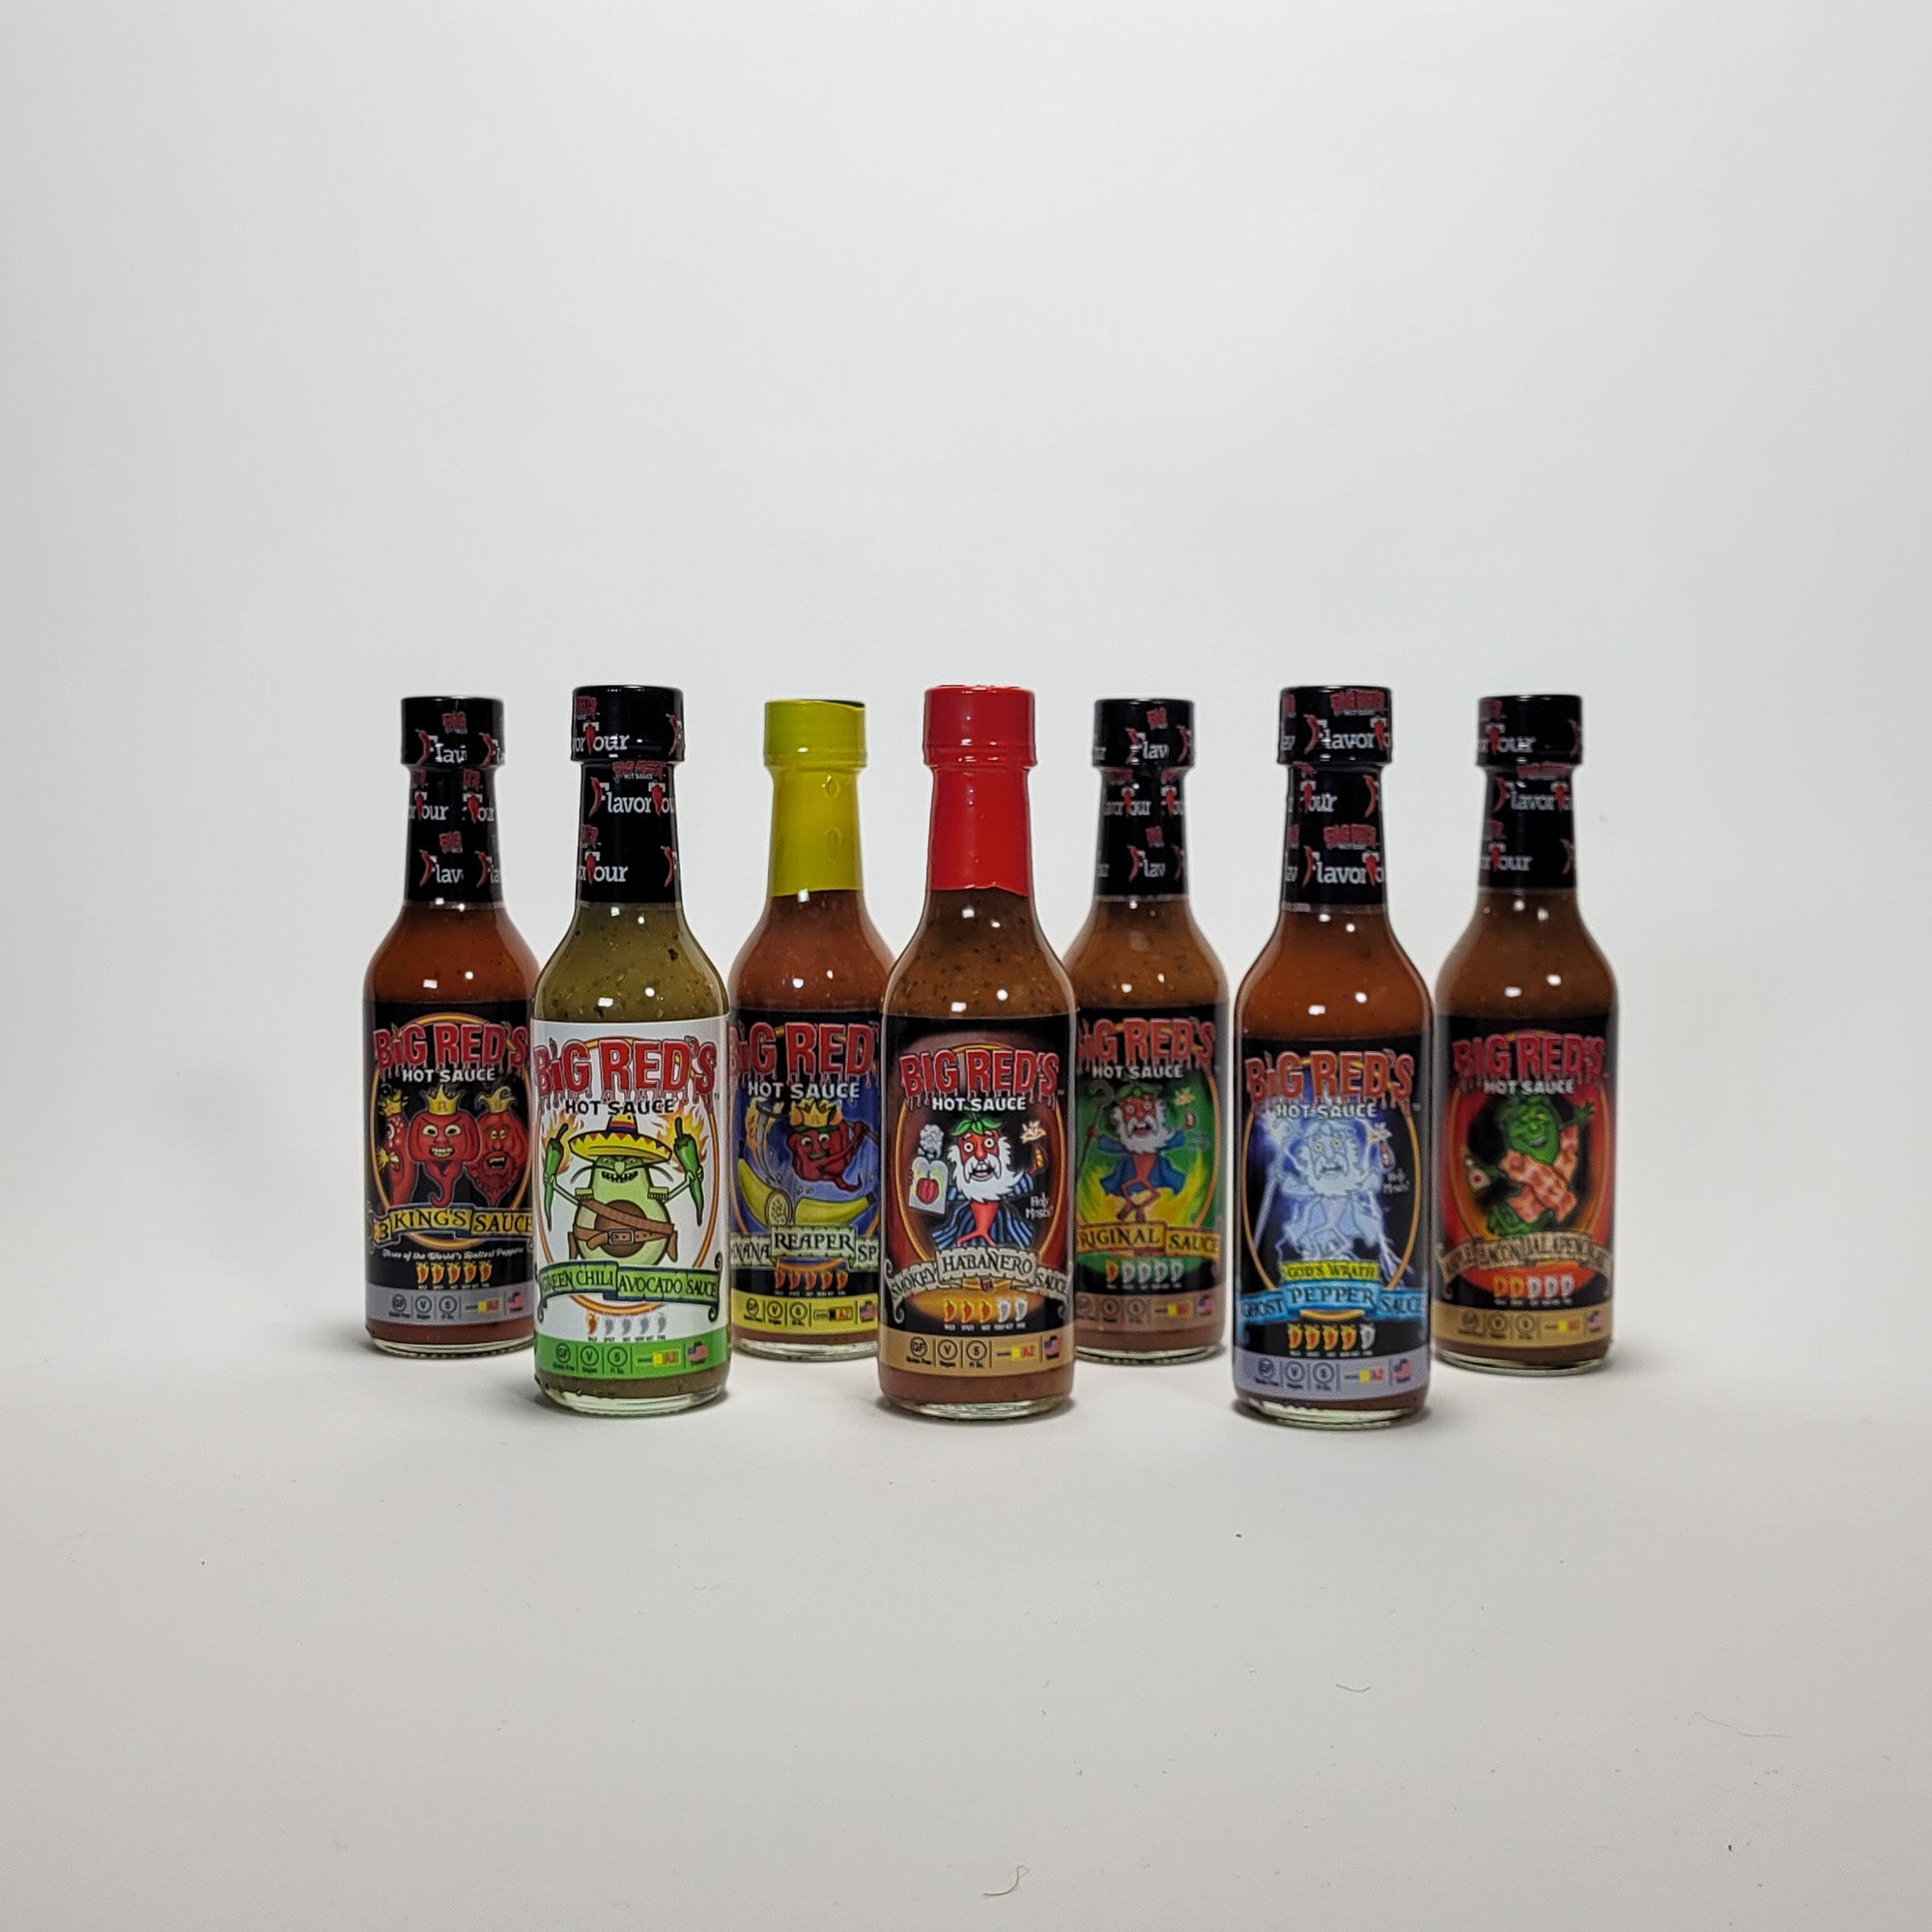 Big Red's Hot sauce collection